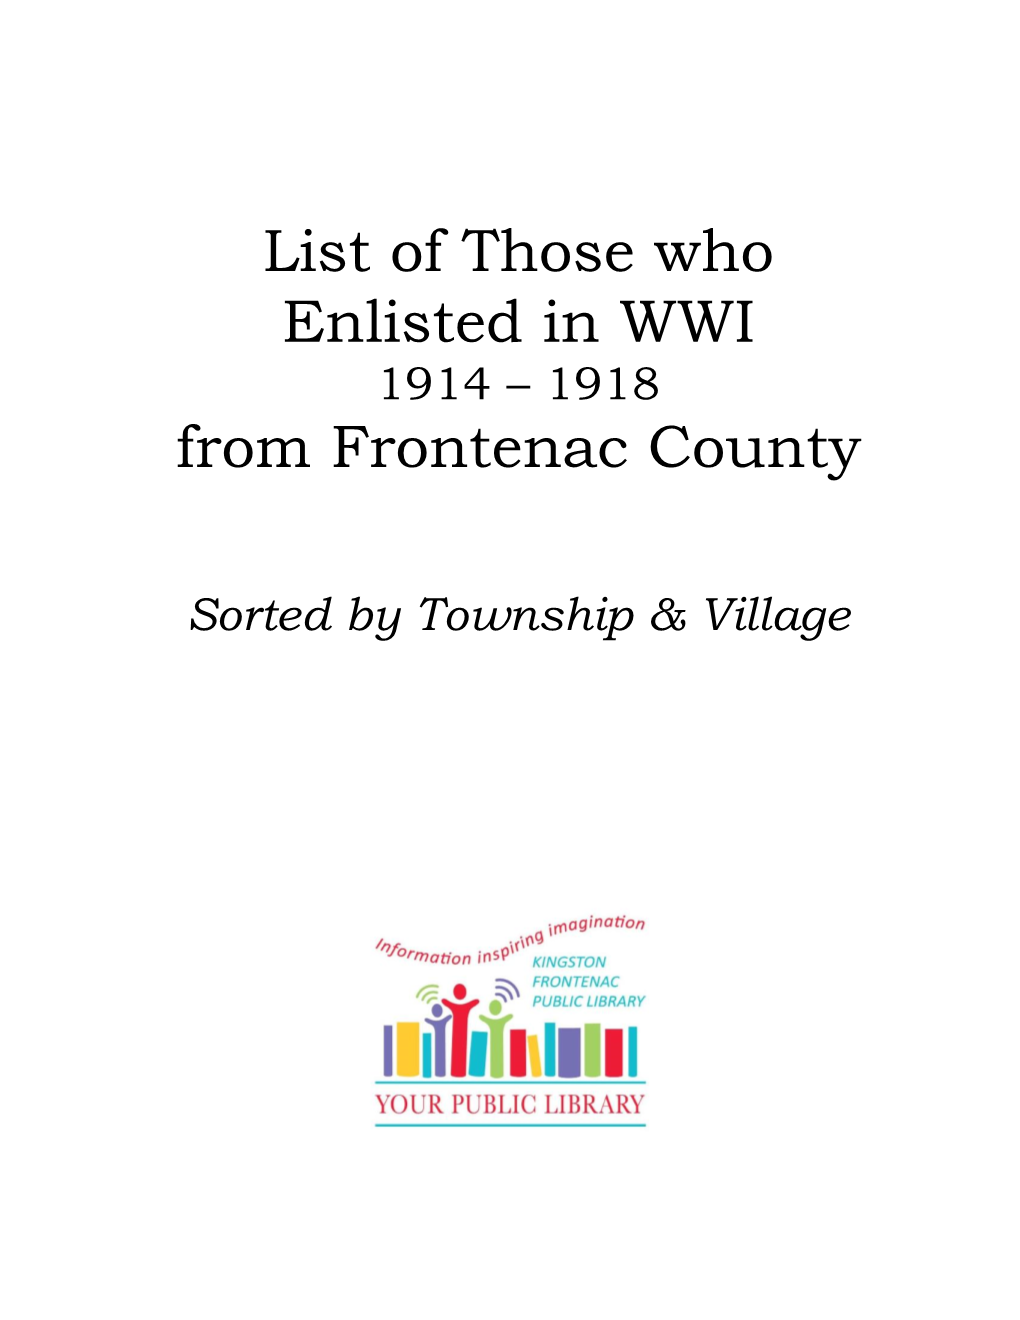 List of Those Who Enlisted in WWI from Frontenac County